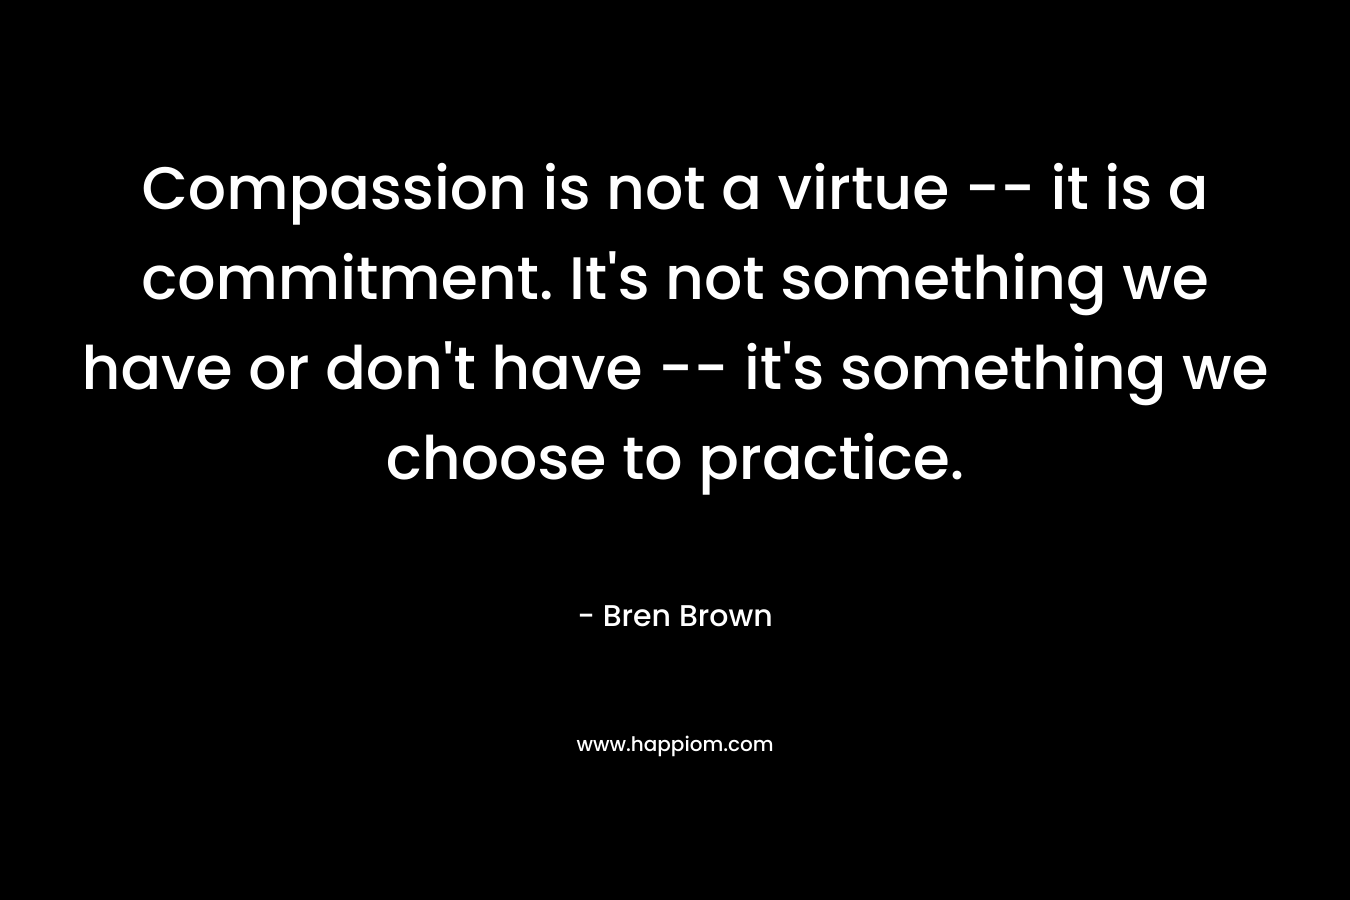 Compassion is not a virtue -- it is a commitment. It's not something we have or don't have -- it's something we choose to practice.